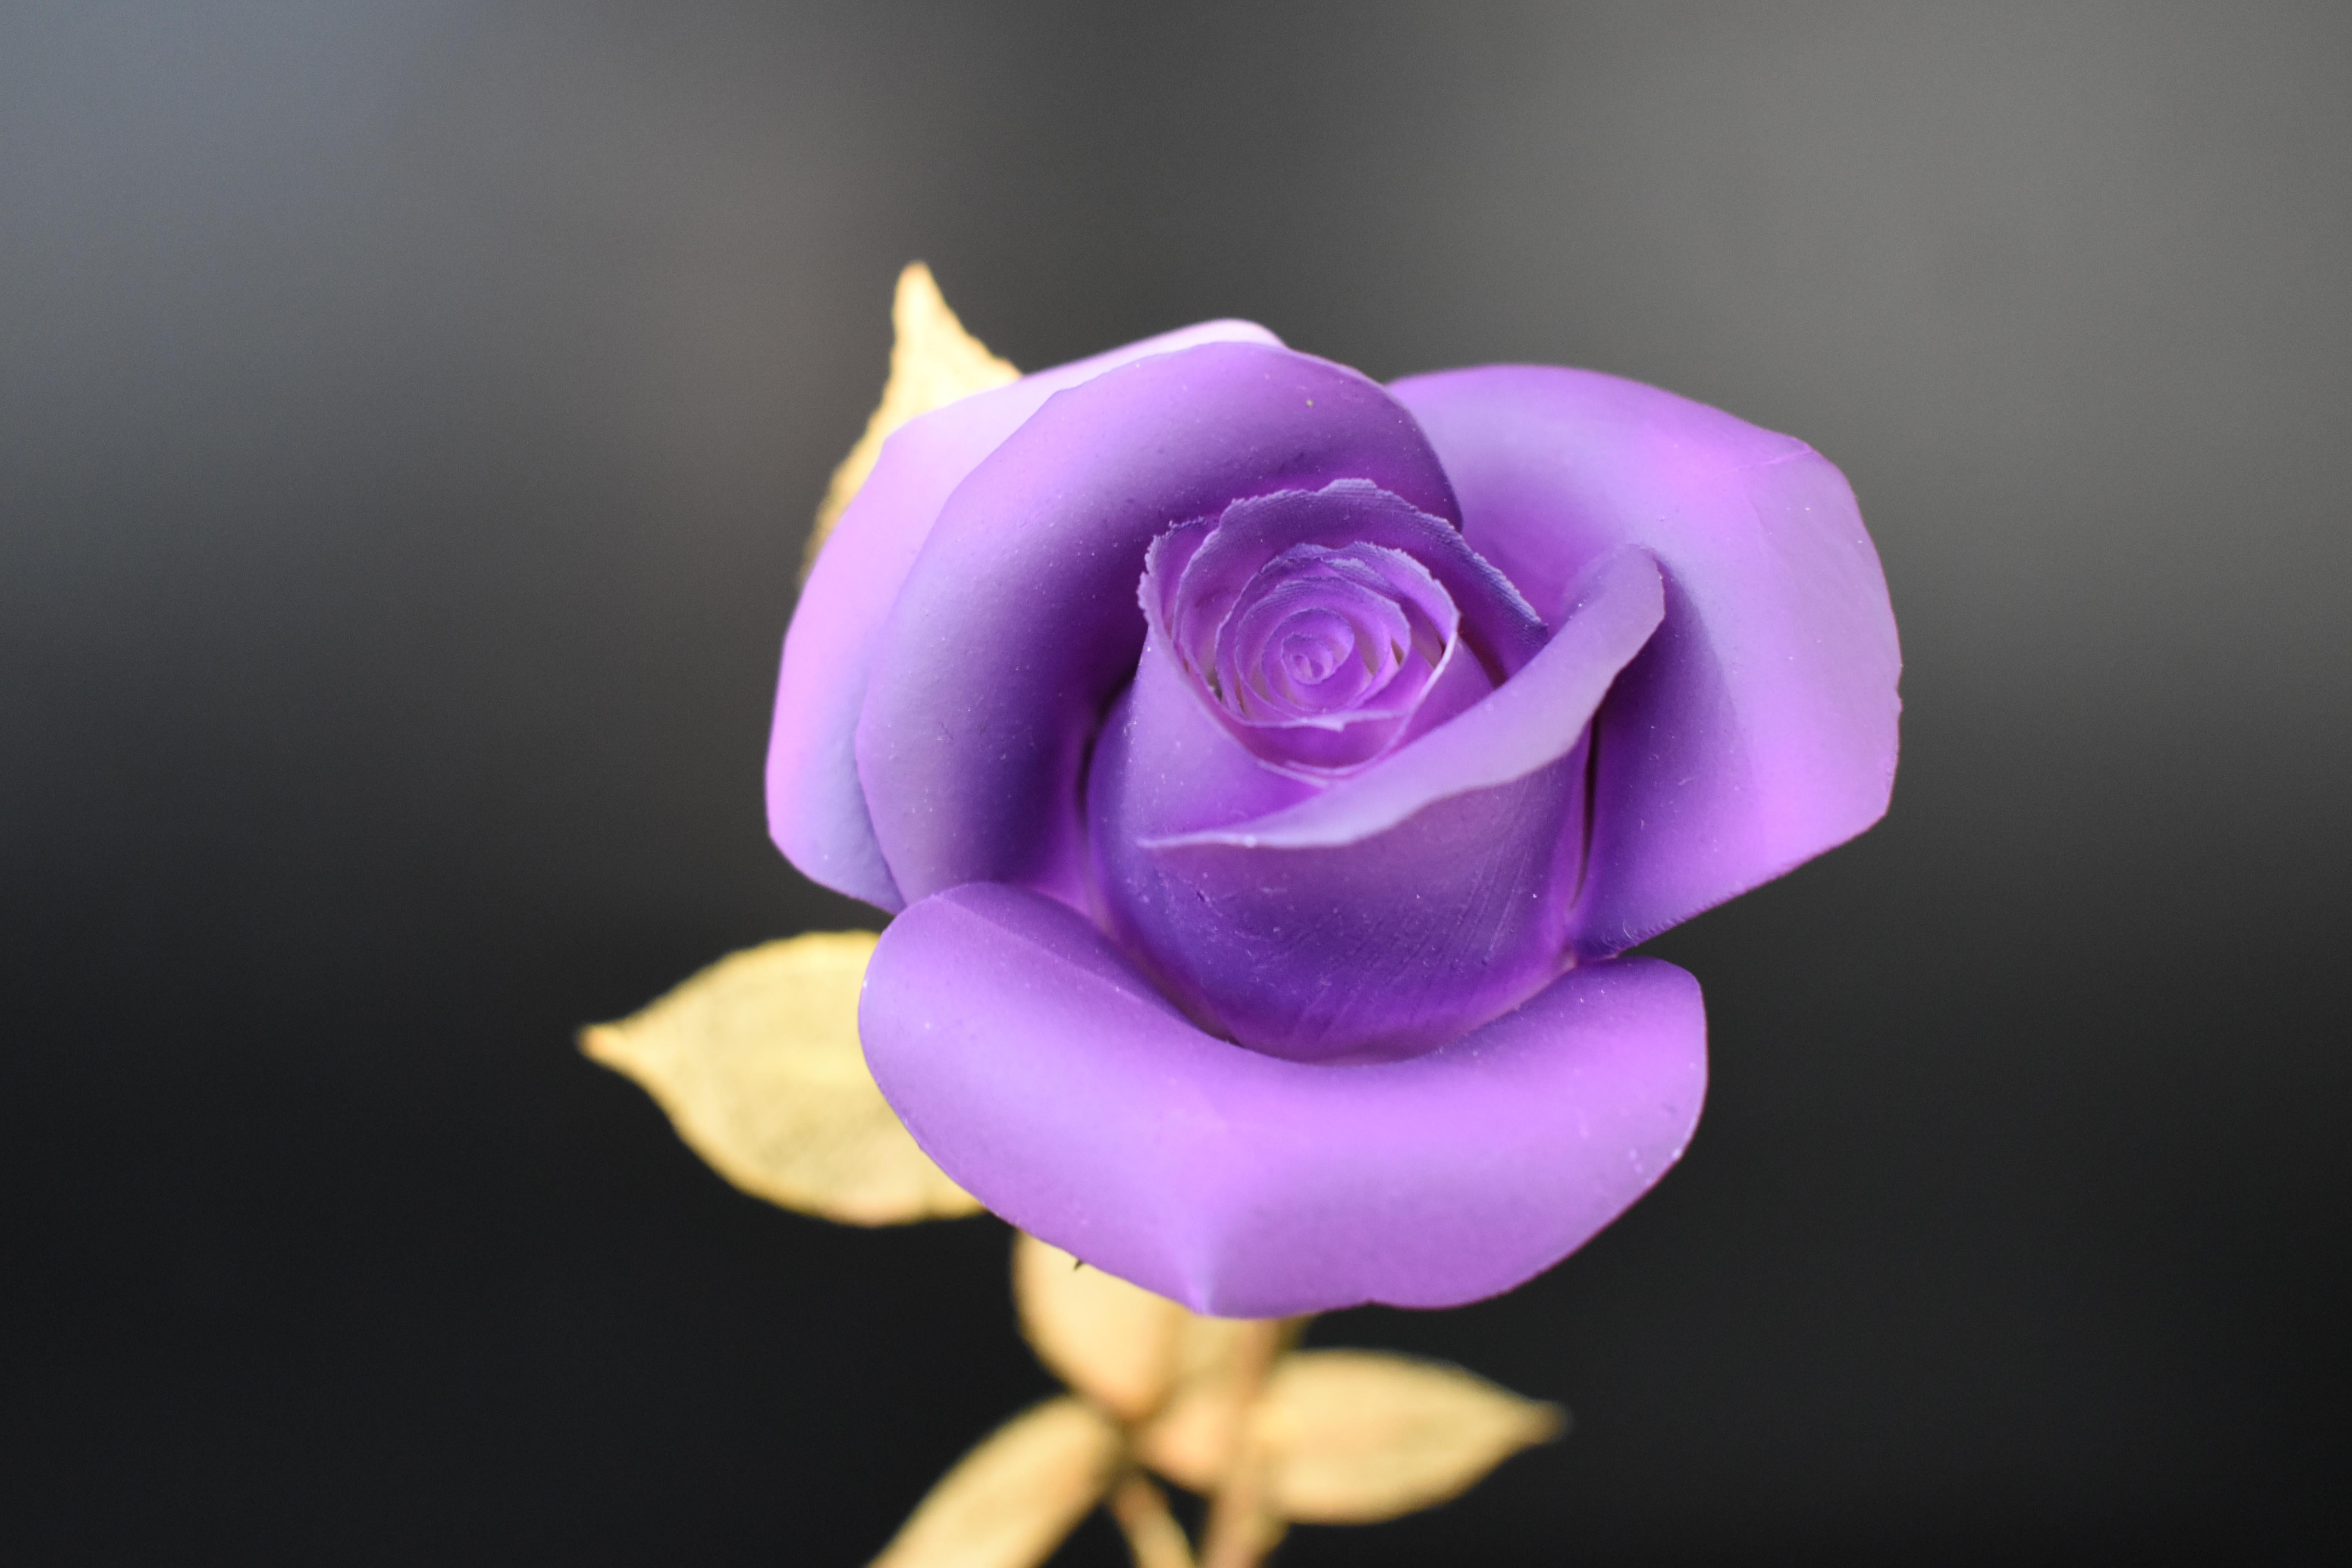 Huang Yulong Still-Life Sculpture - Rose Sculpture in Ceramic & Steel with A Delicate Gift Box, Purple & Gold Color